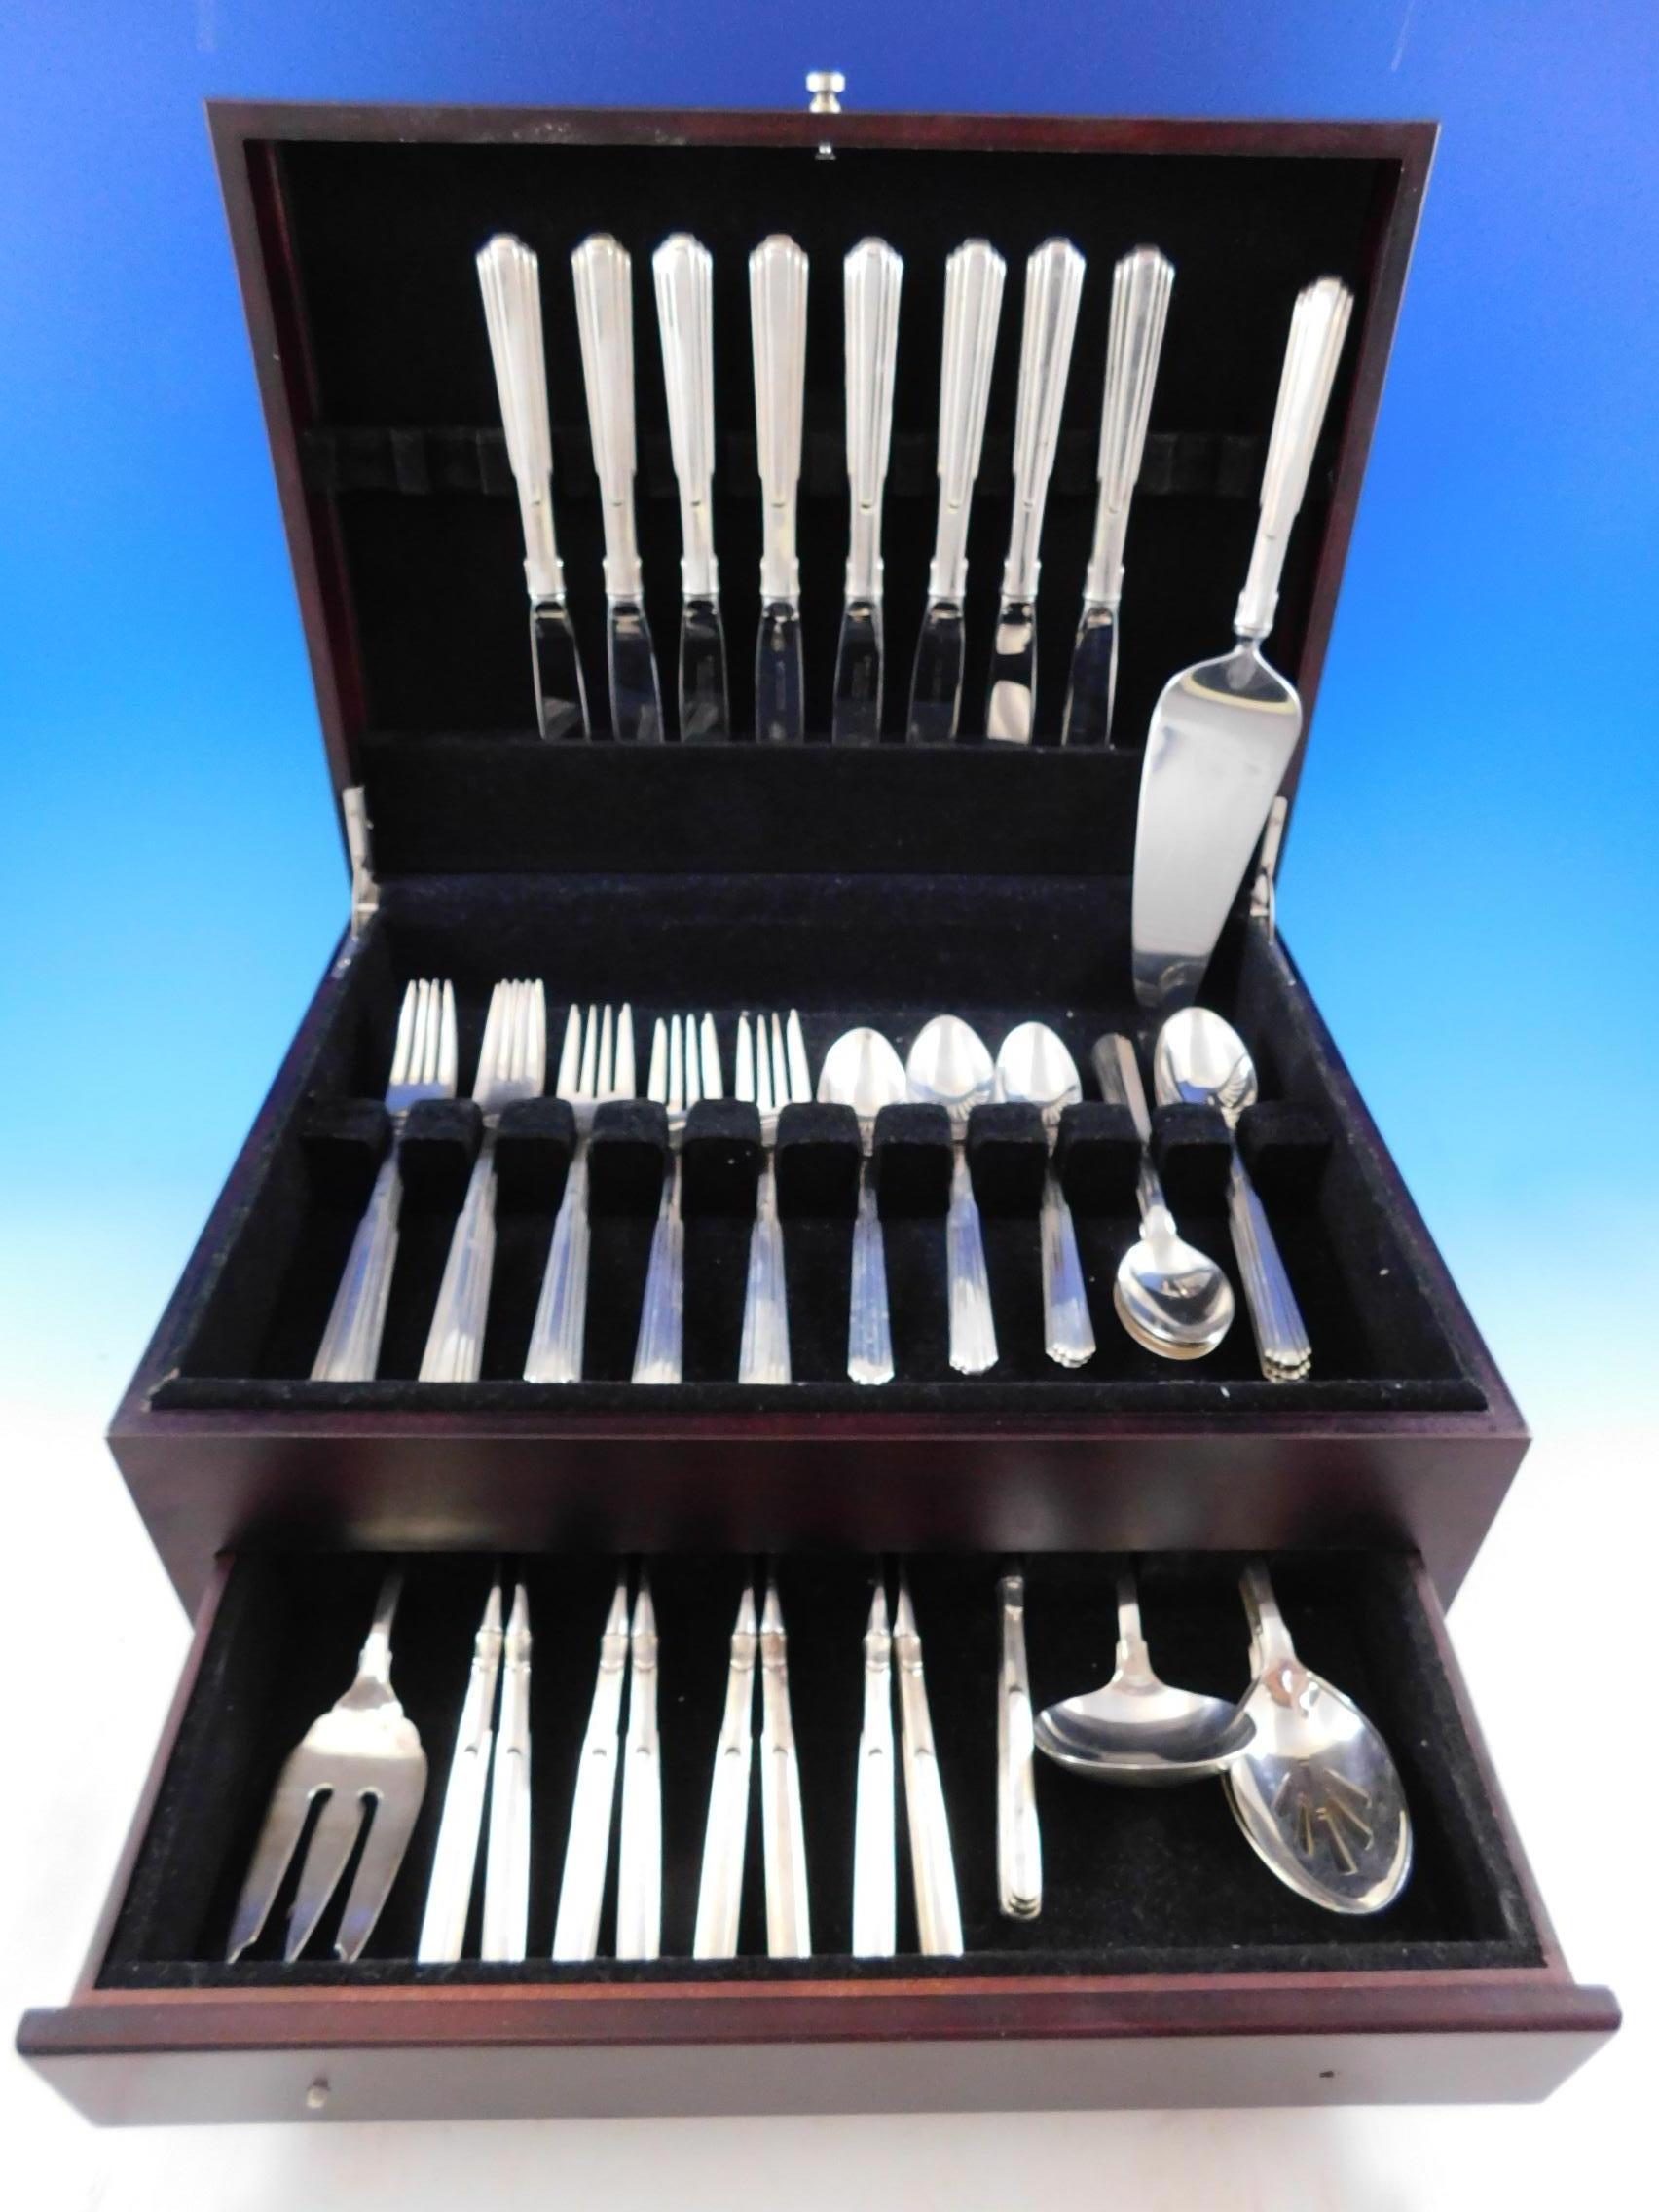 Paramount by Kirk sterling silver flatware set, 55 pieces. This modern design is based on the New York city skyline and architecture. This set includes:

8 knives, 9 1/8